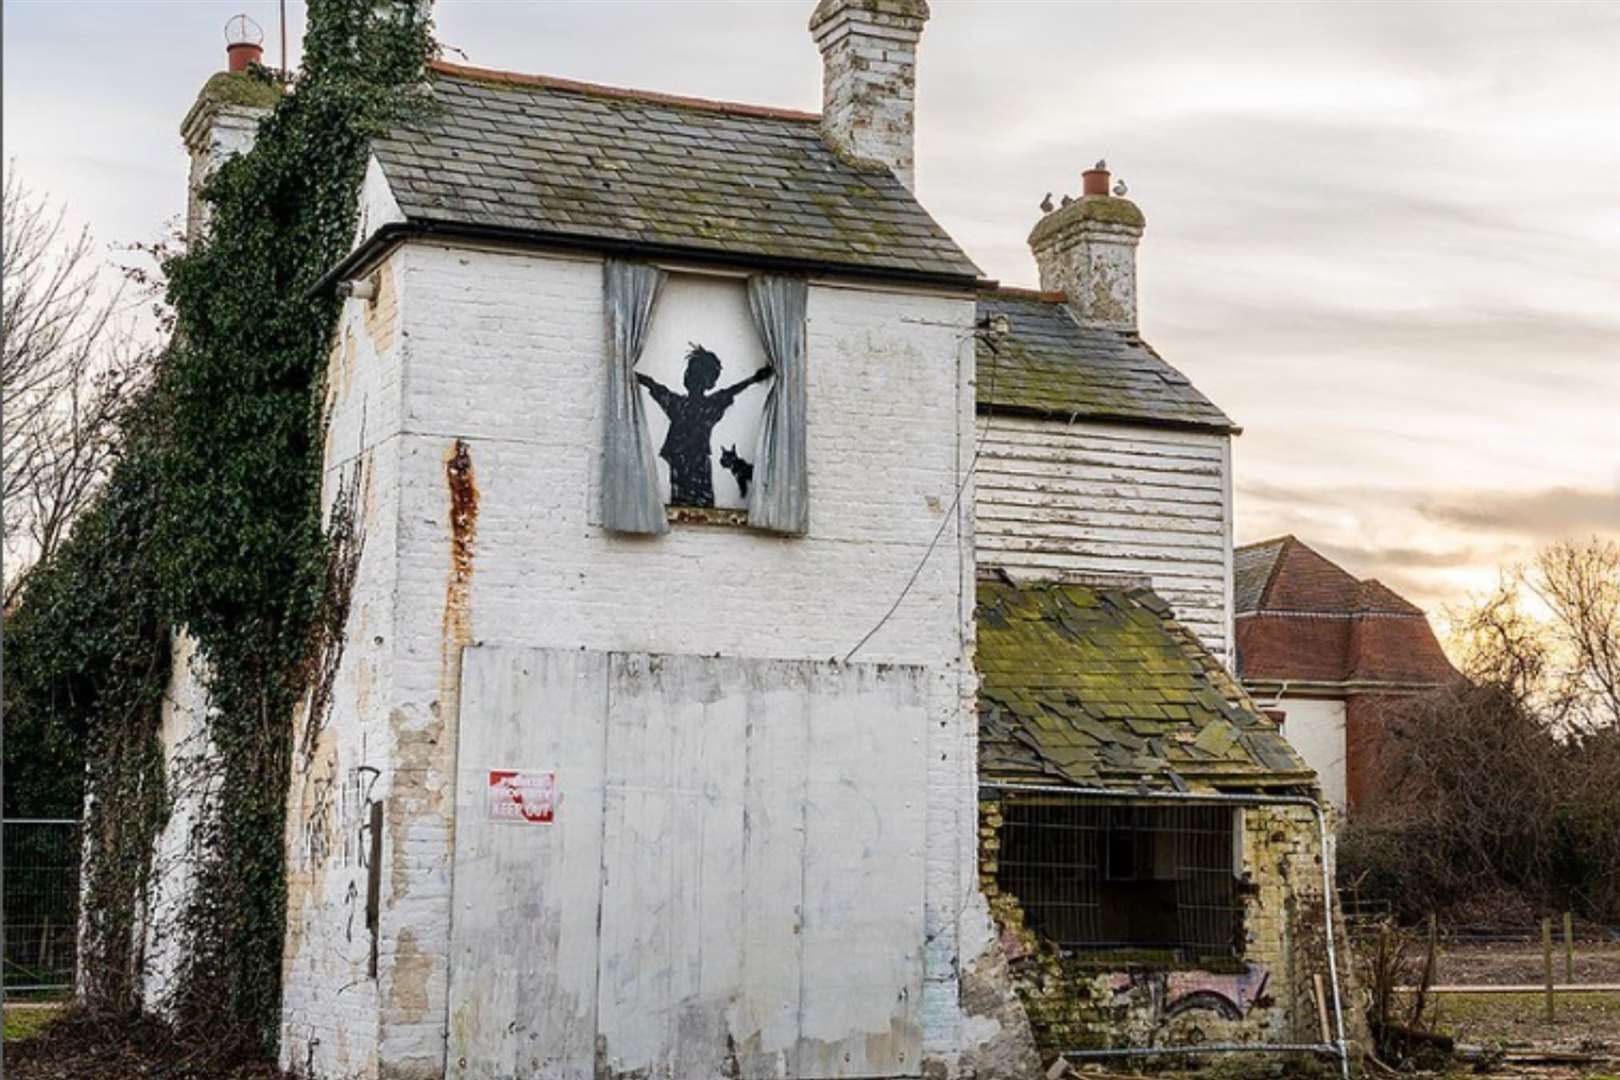 Banksy confirmed the work near Herne Bay was his yesterday. Picture: Banksy via Instagram